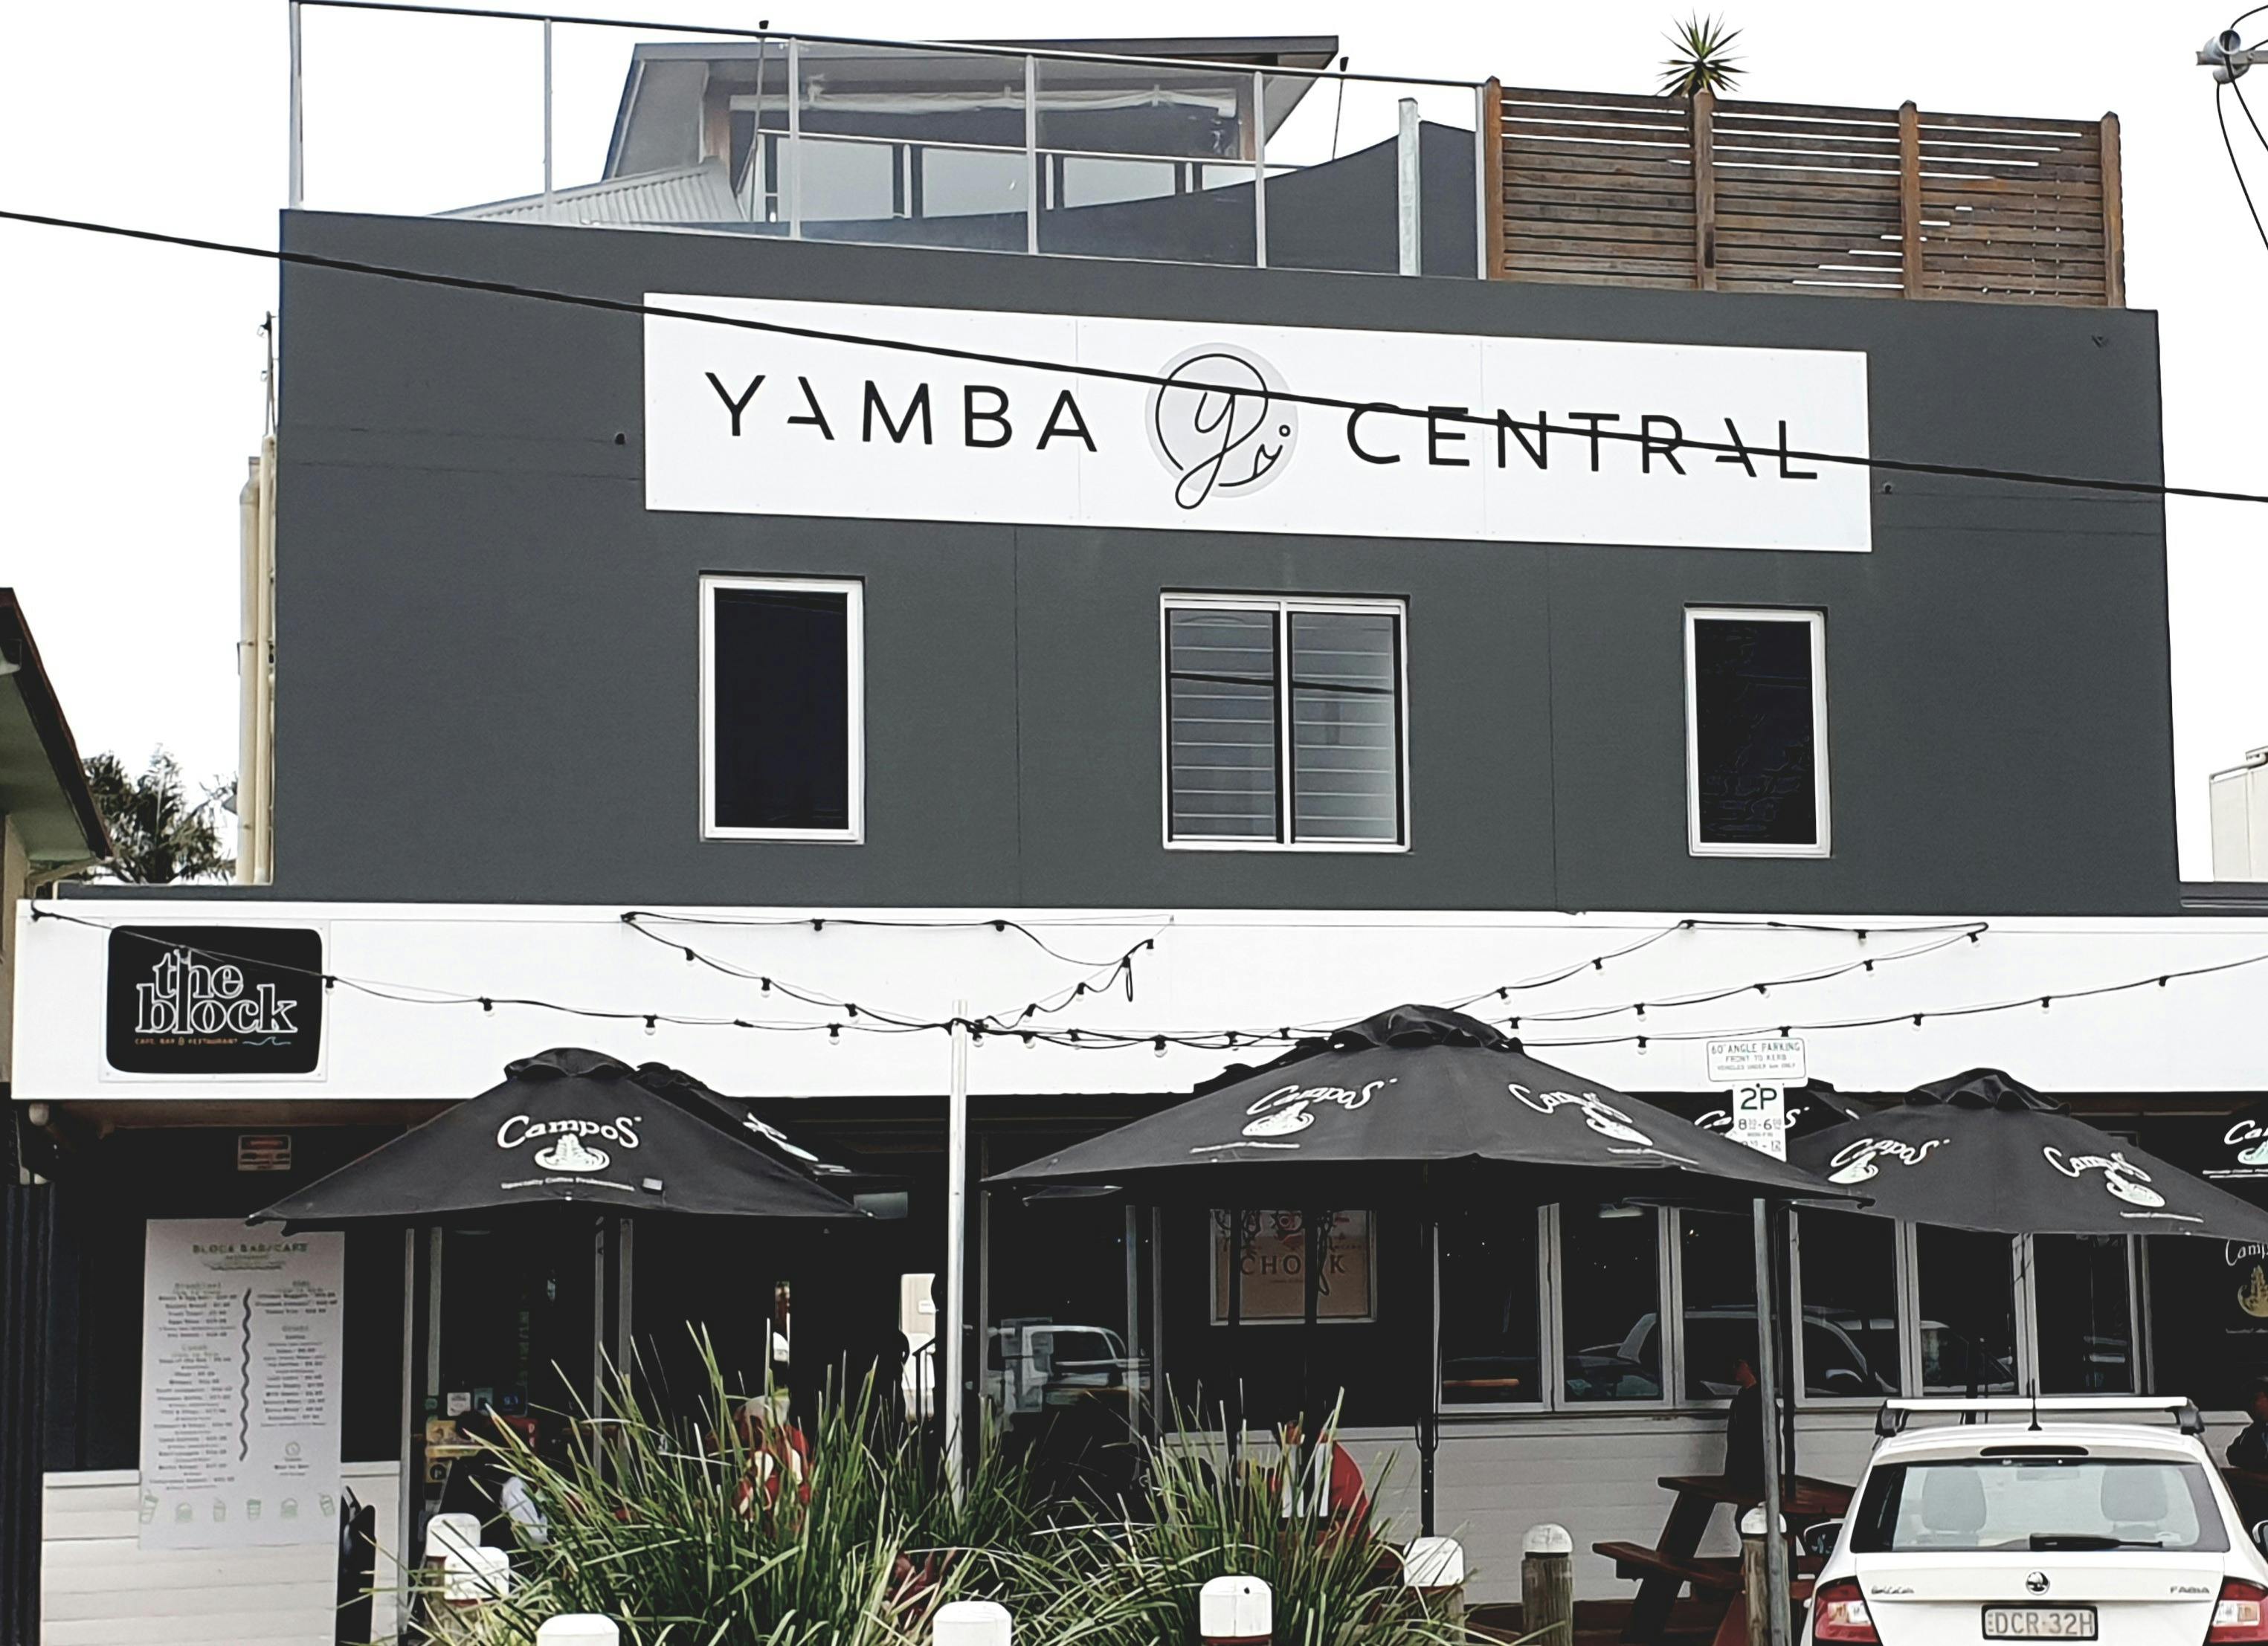 Yamba Central | NSW Holidays & Accommodation, Things to Do, Attractions